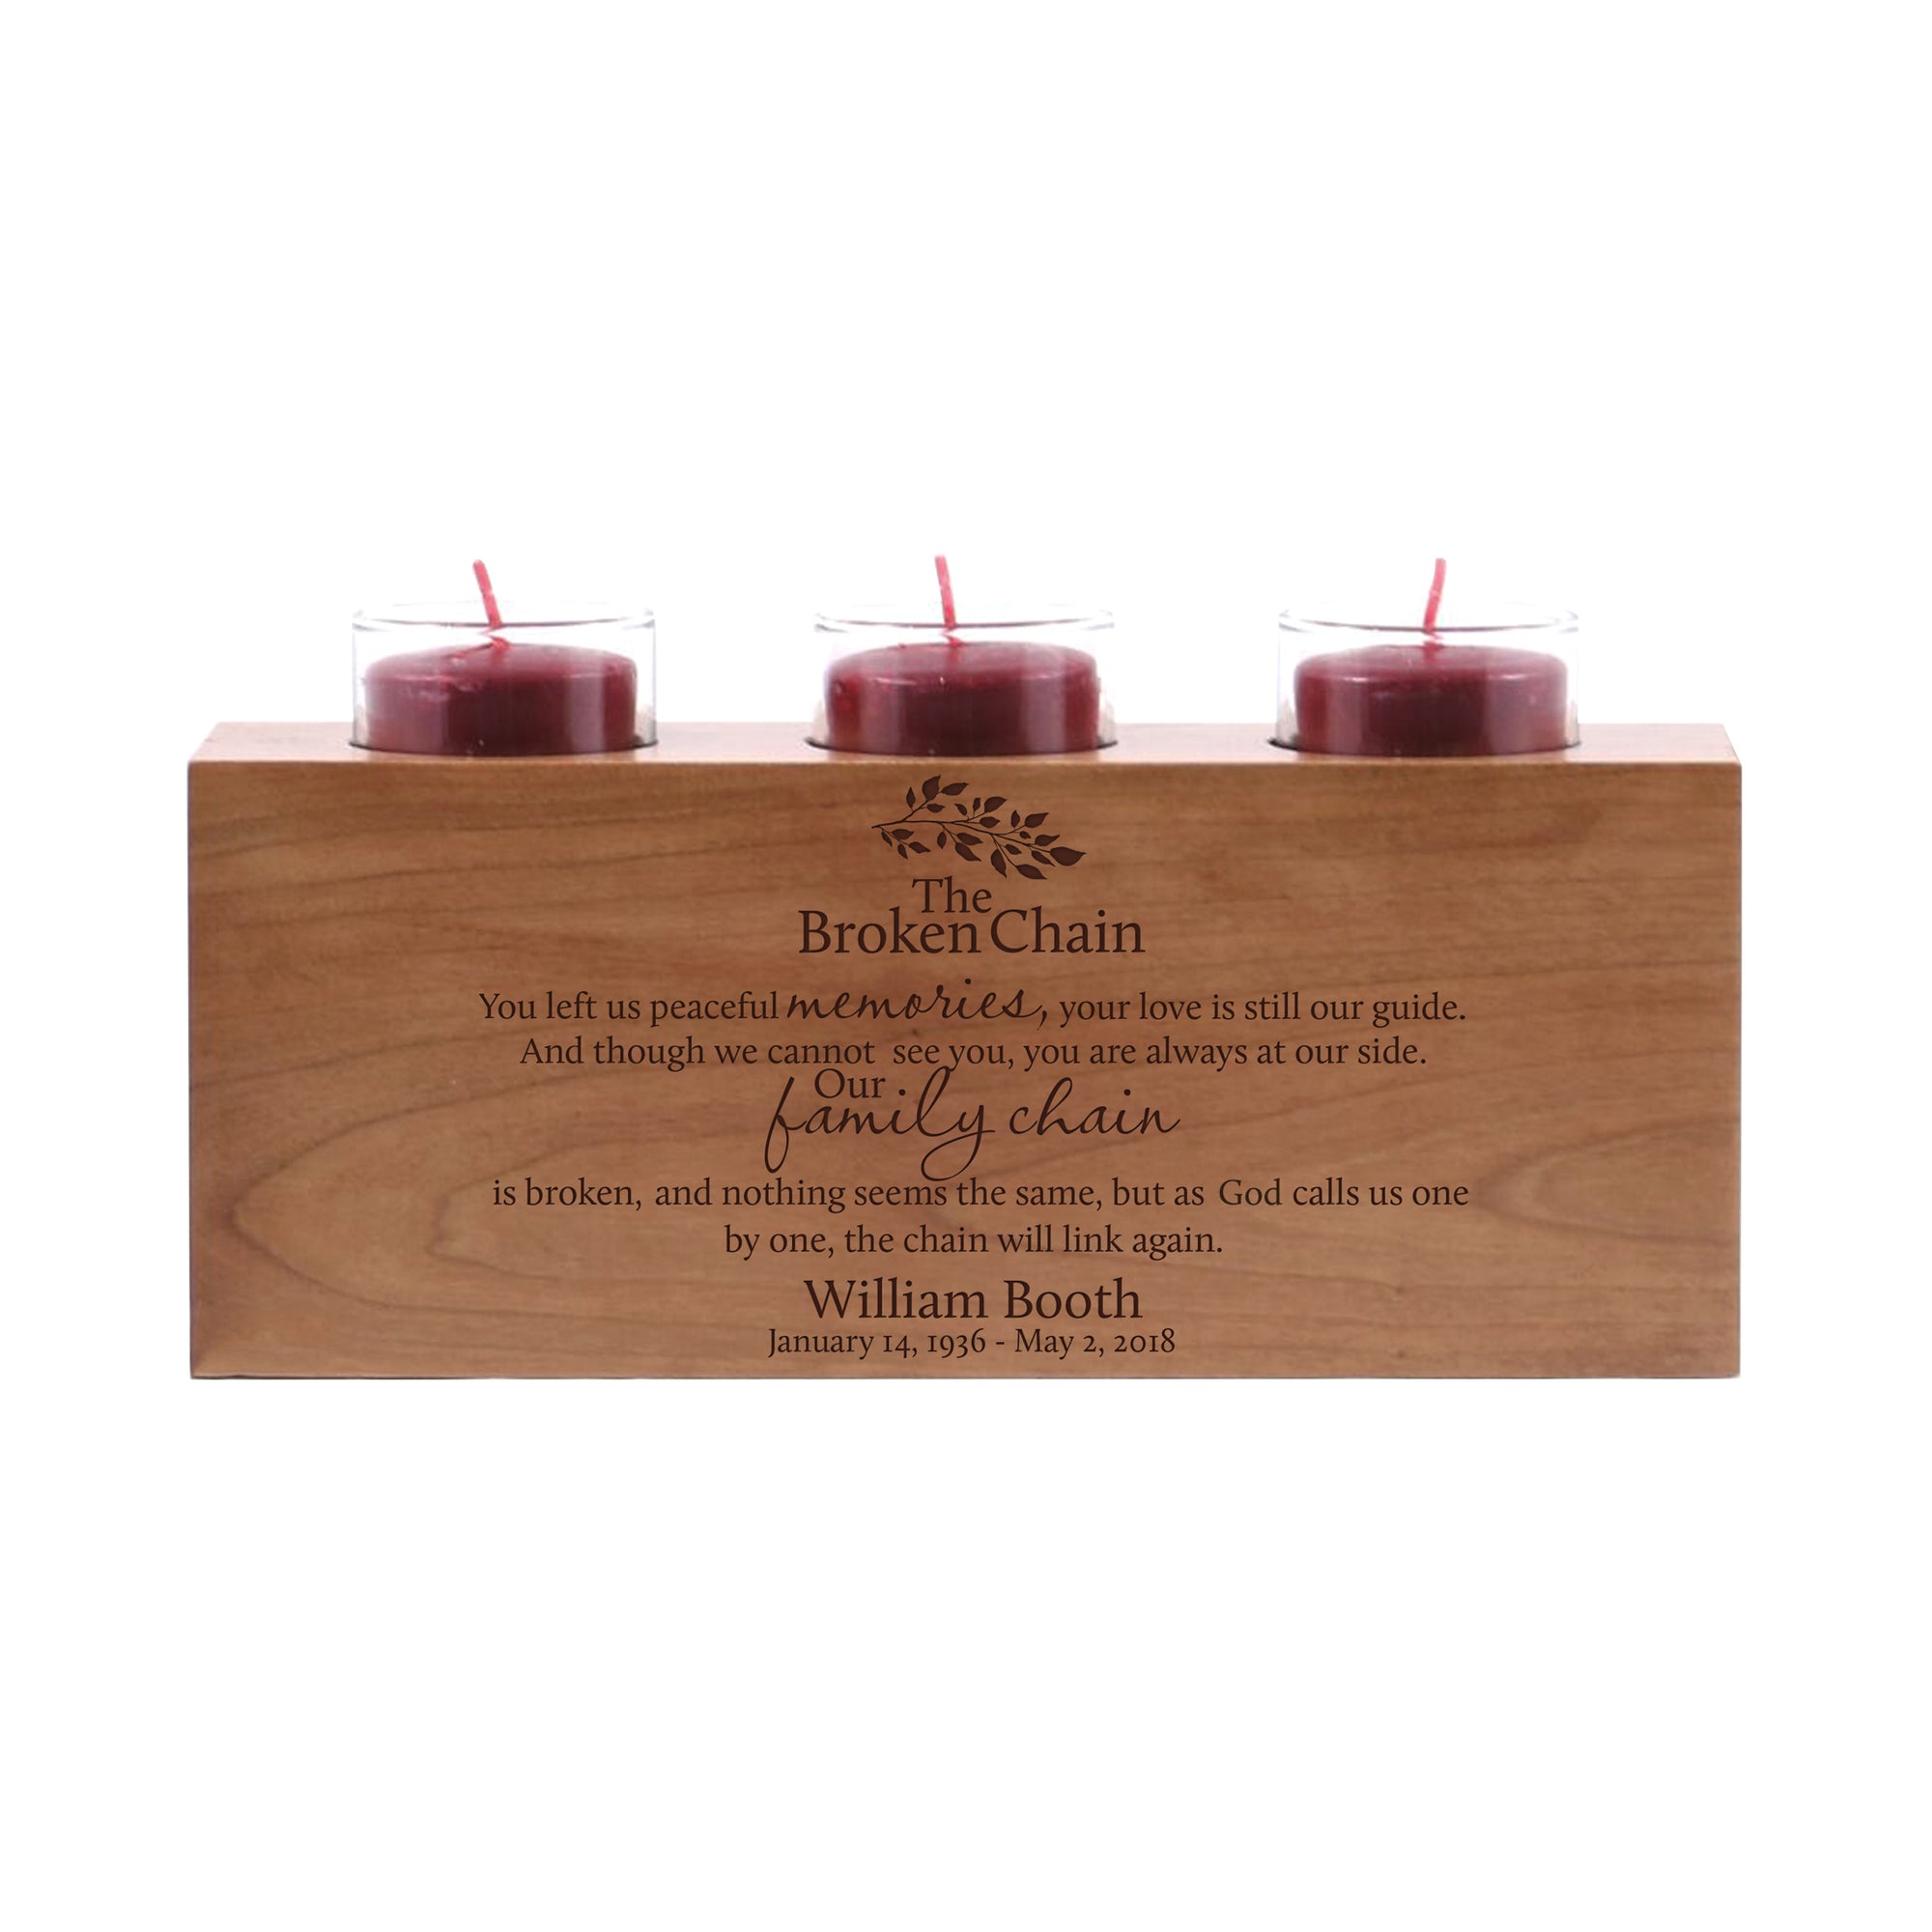 LifeSong Milestones Personalized Memorial 3 Votive Candle Holder The Broken Chain 2 Bereavement Keepsake Candle Holder Loss of Loved One Sympathy Home Decor - 10” x 4” x 4”